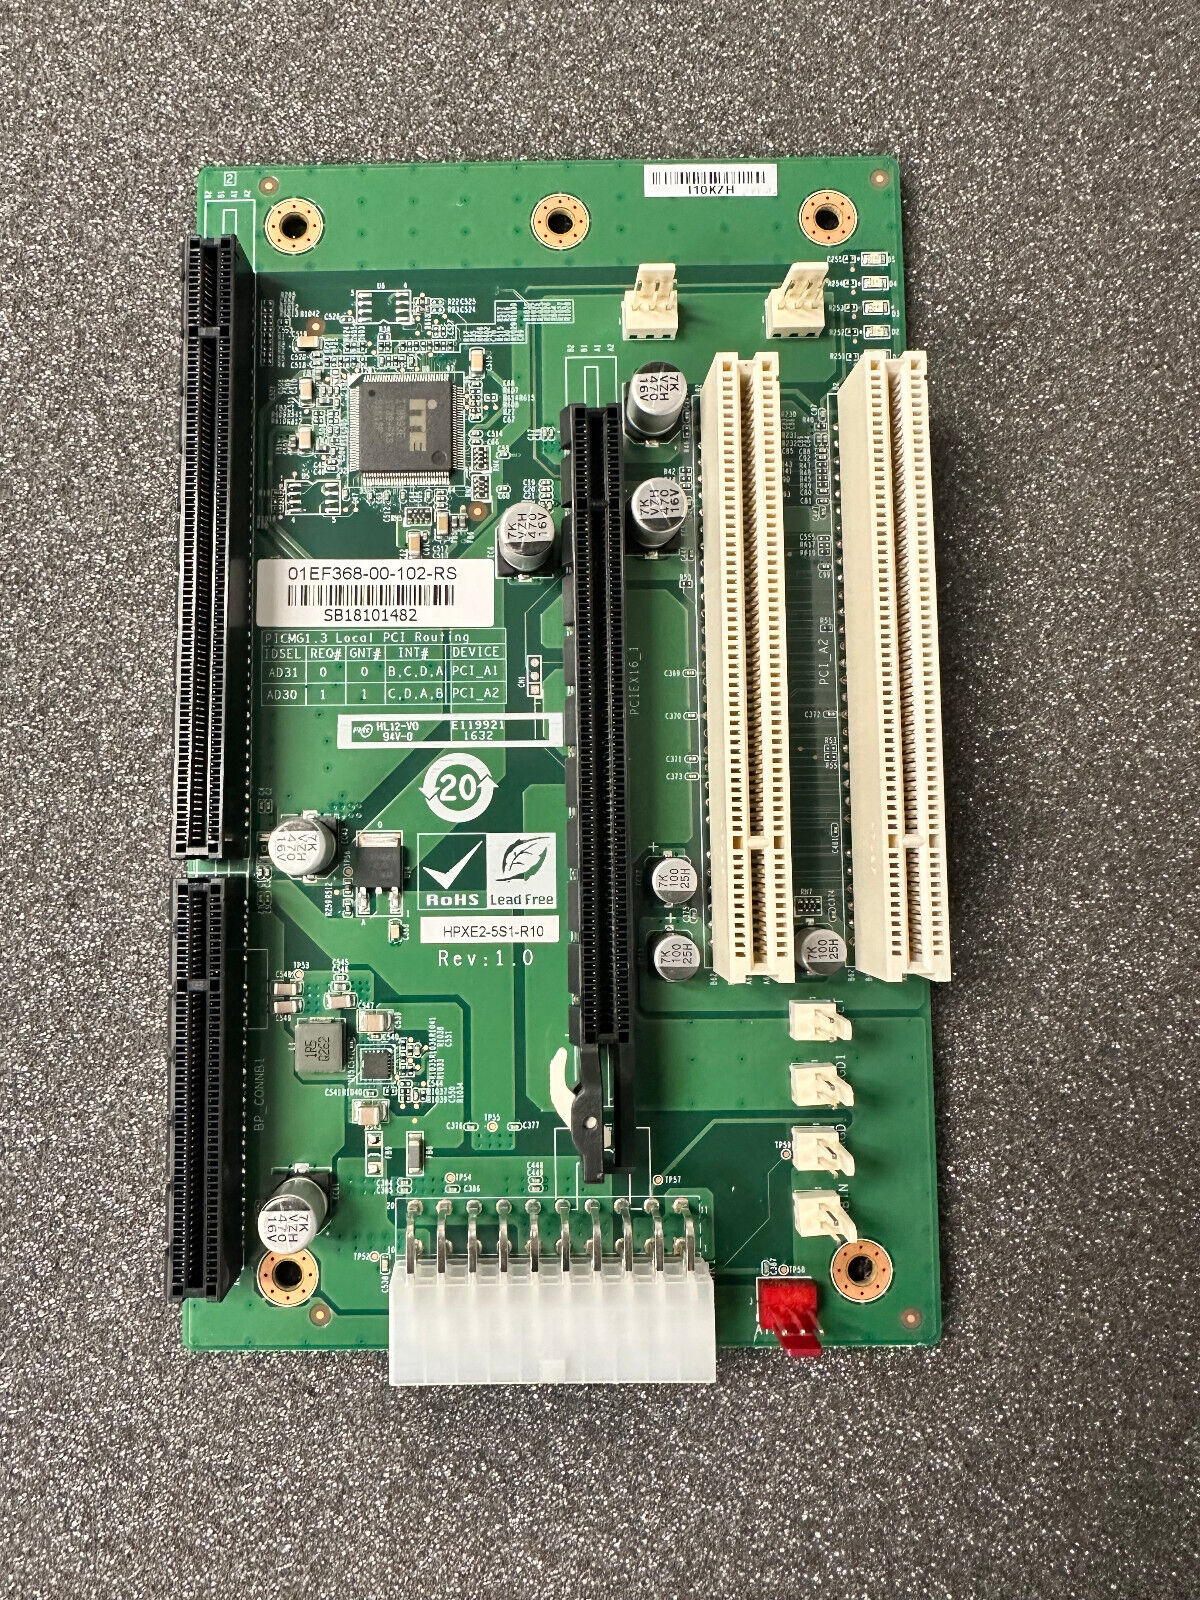 IEI Technology HPXE2-5S1-R10 5-slot PICMG 1.3 backplane for half-size SBC